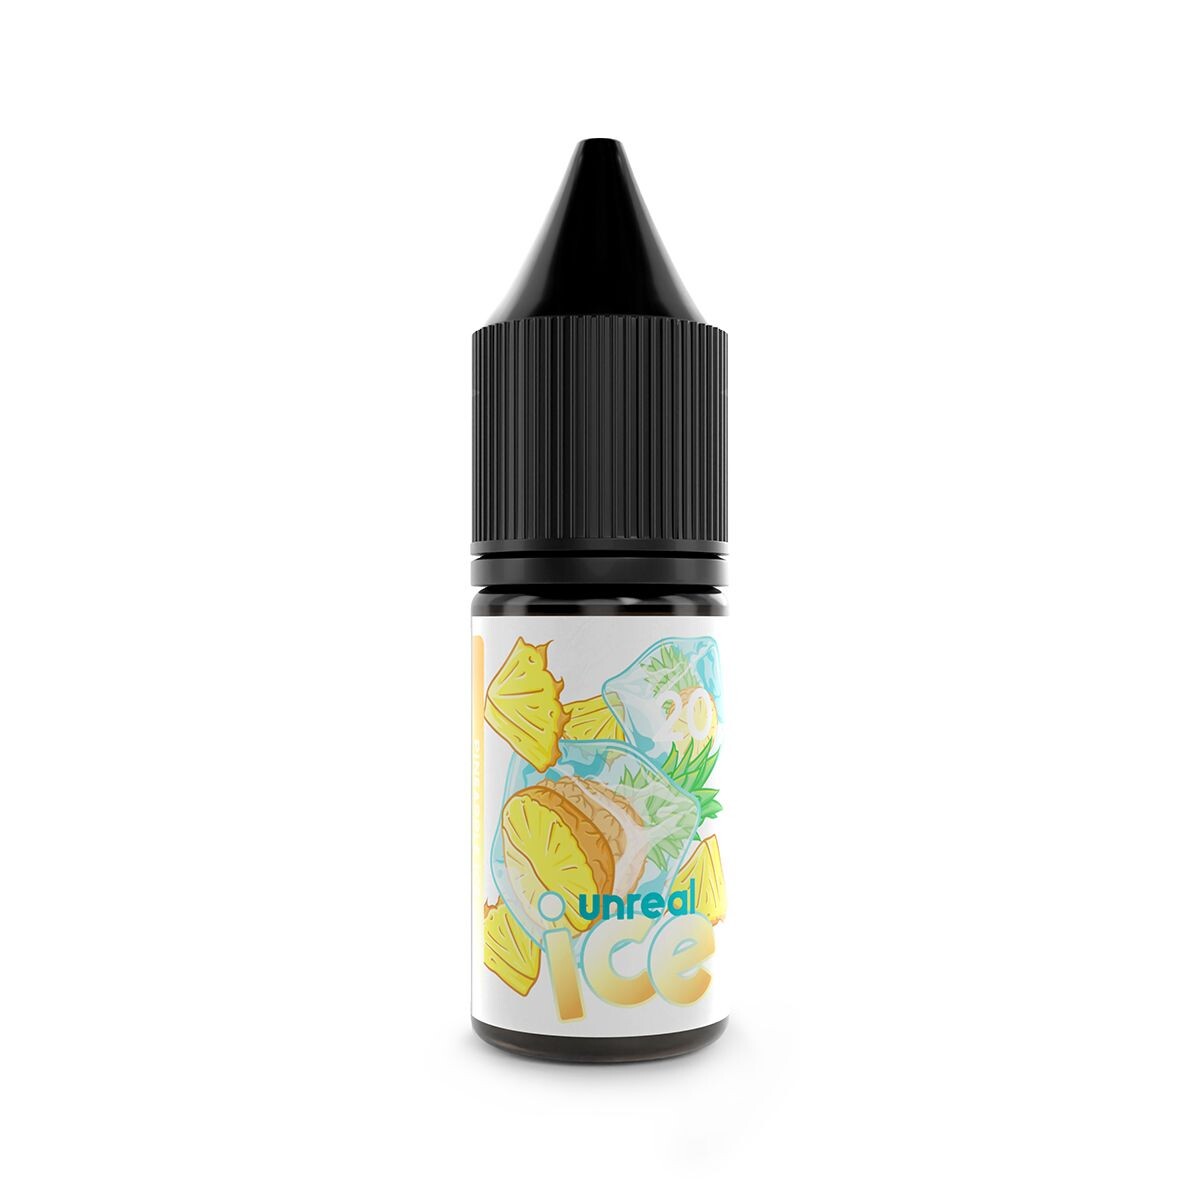 Unreal Ice Pineapple Ice 10ml Nic Salt, A Super Fresh Flavour Available At Dispergo Vaping UK